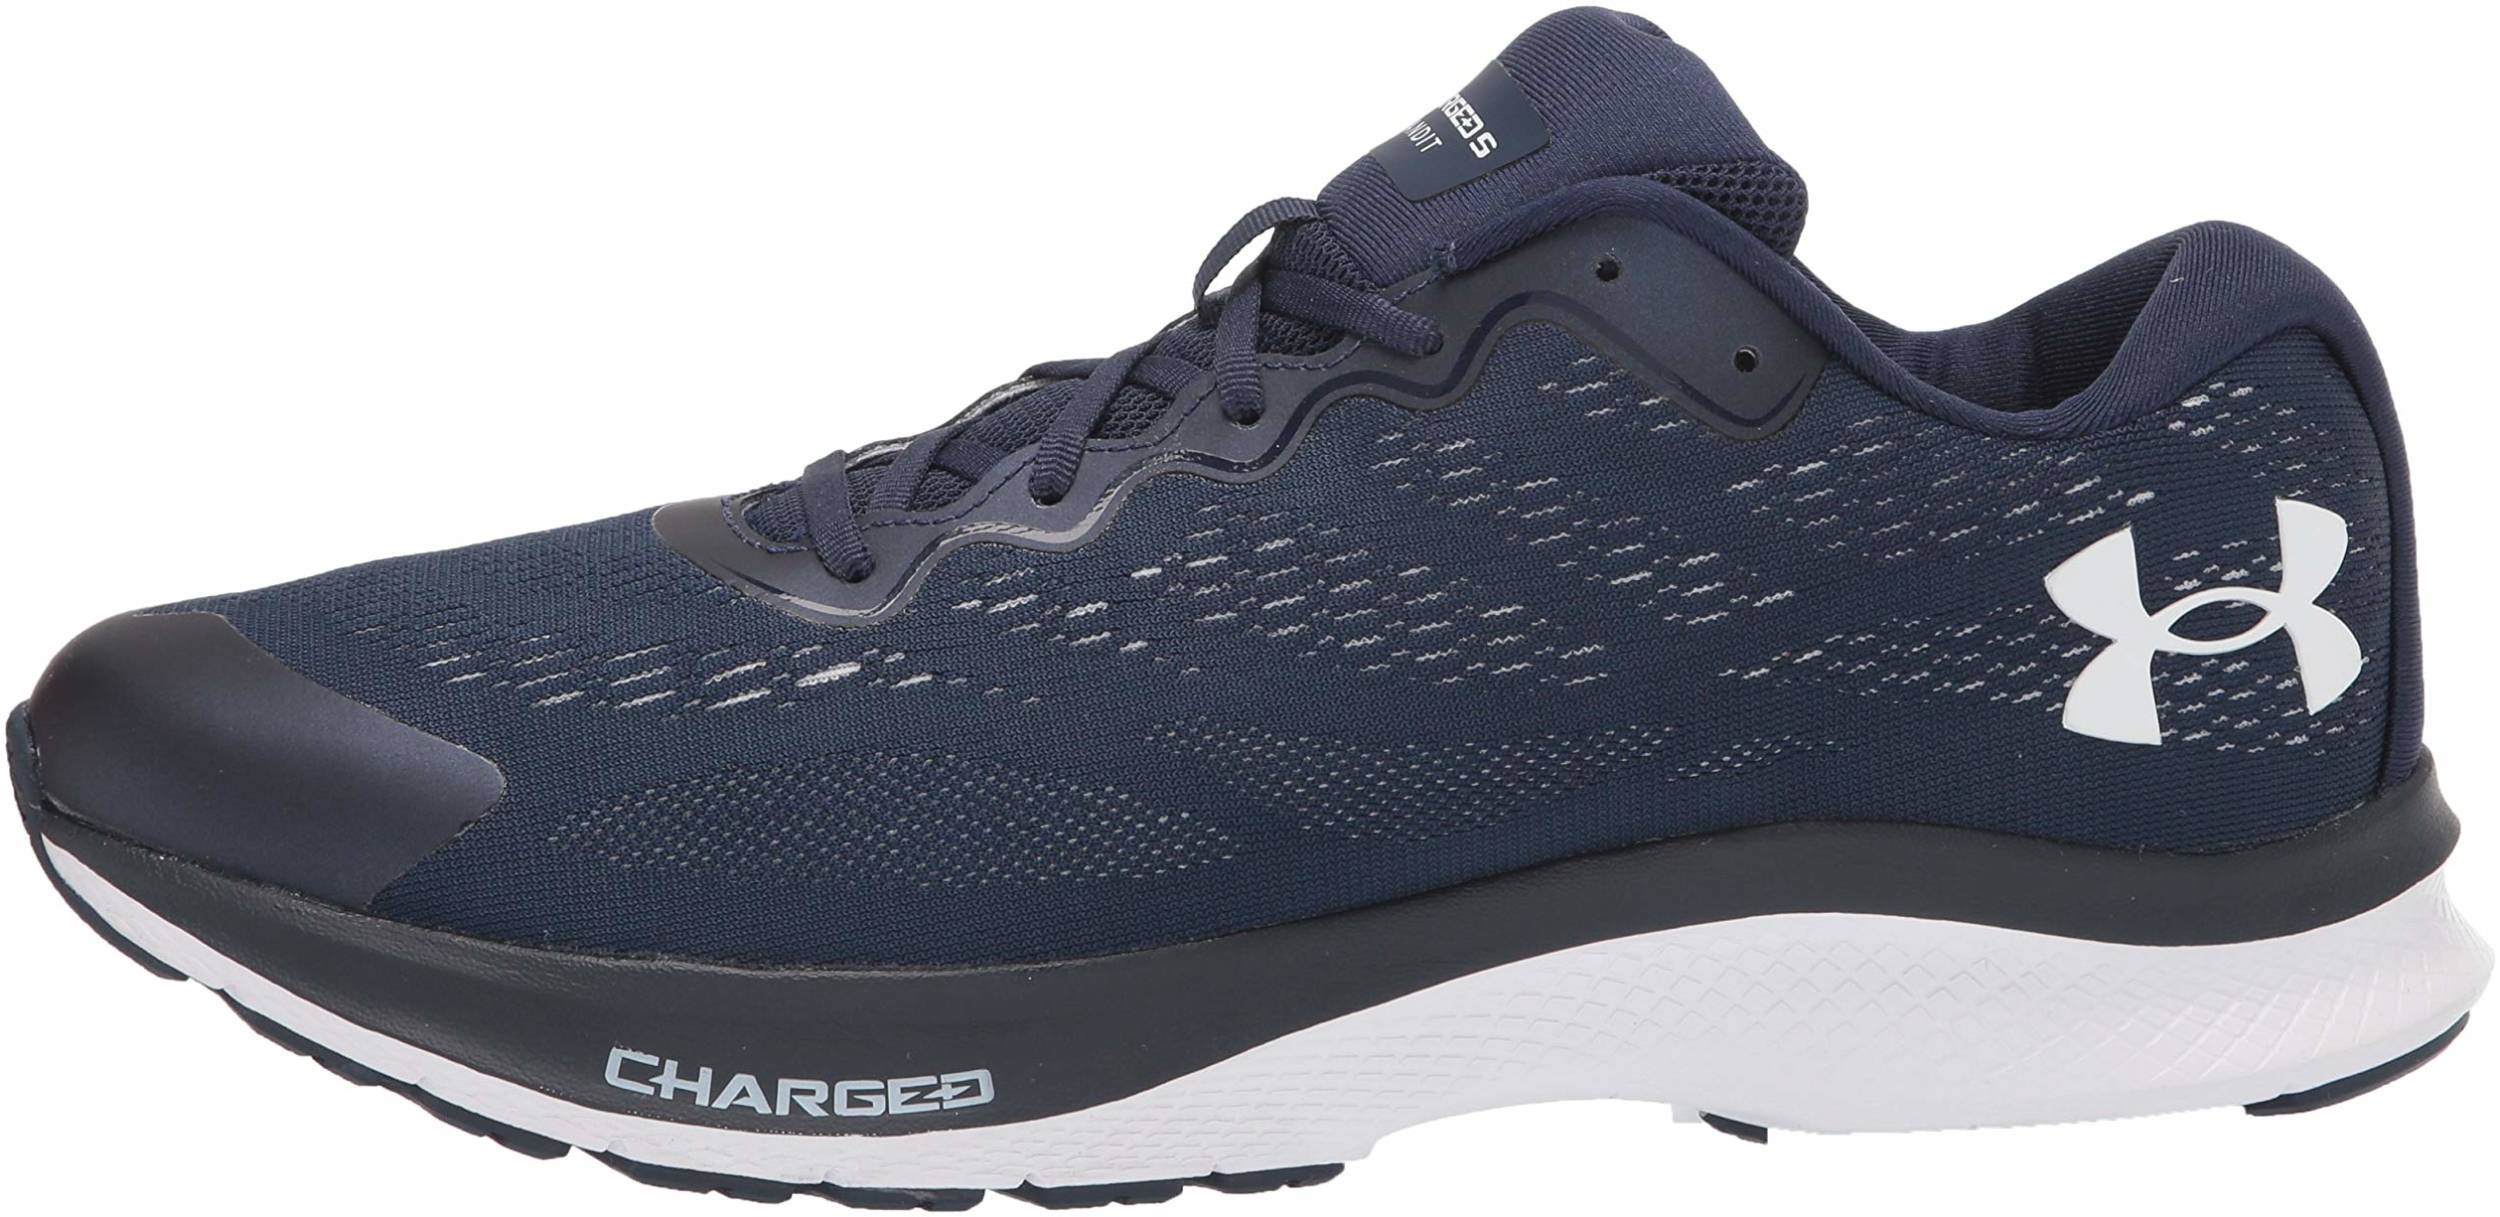 Under Armour Charged Bandit 4 Womens Running Shoes Black Cushioned Trainers 